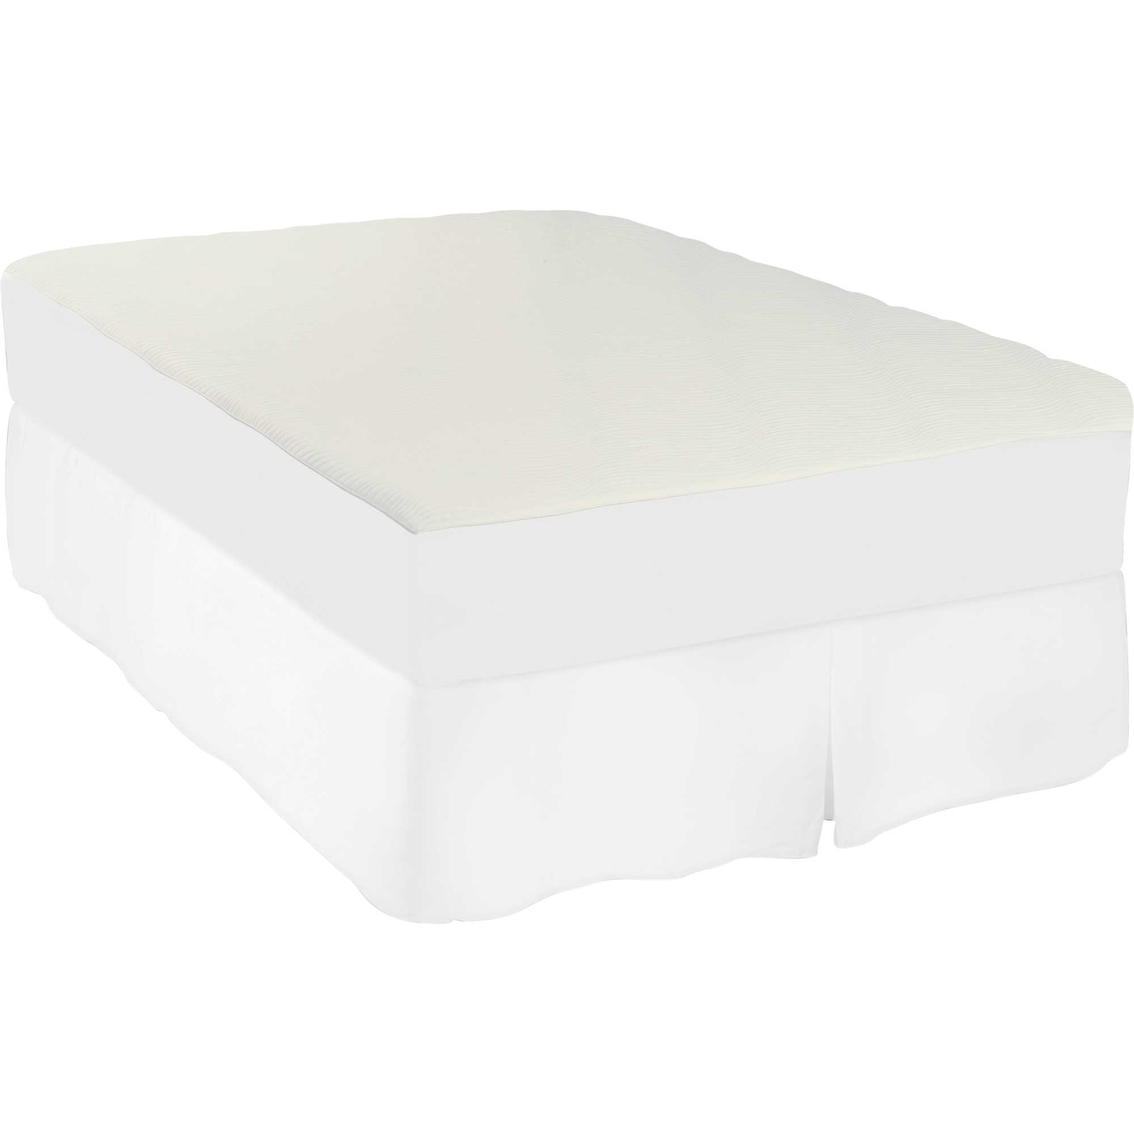 Sealy Luxury Knit Mattress Protector - Image 6 of 6